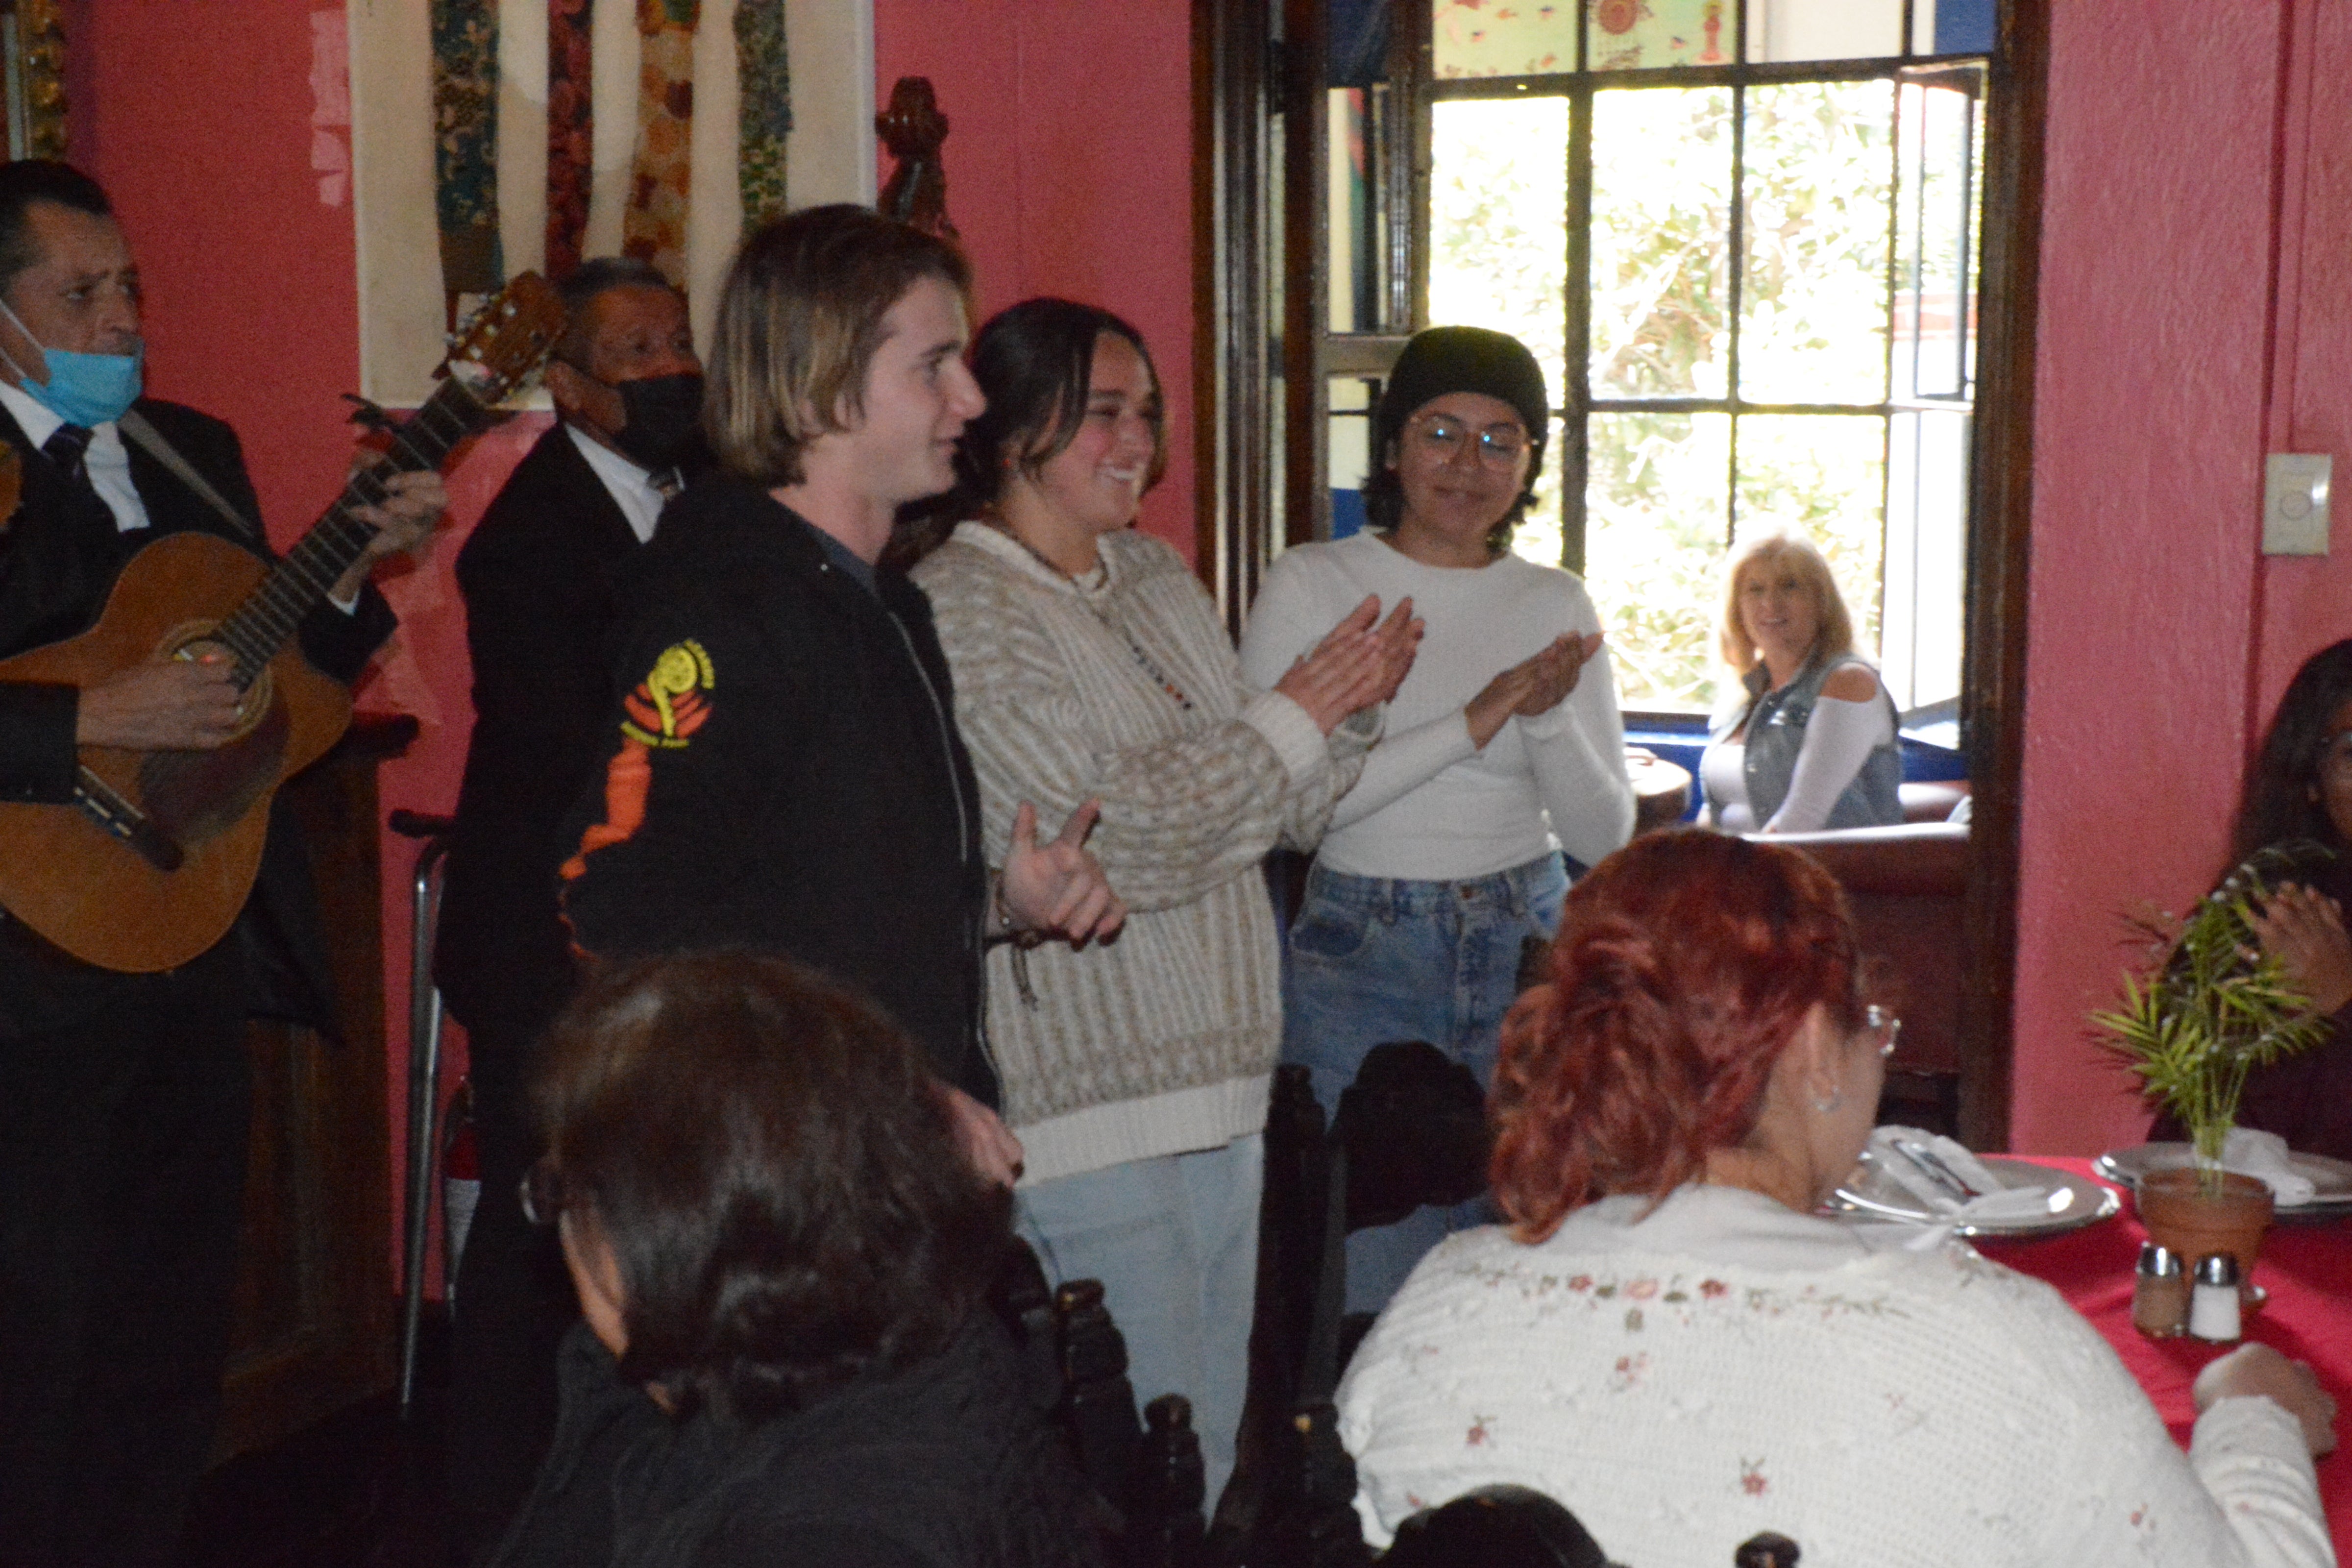 ASU students sing and dance to live music at Restaurant La Roca in Nogales, Sonora, on November 5, 2022.